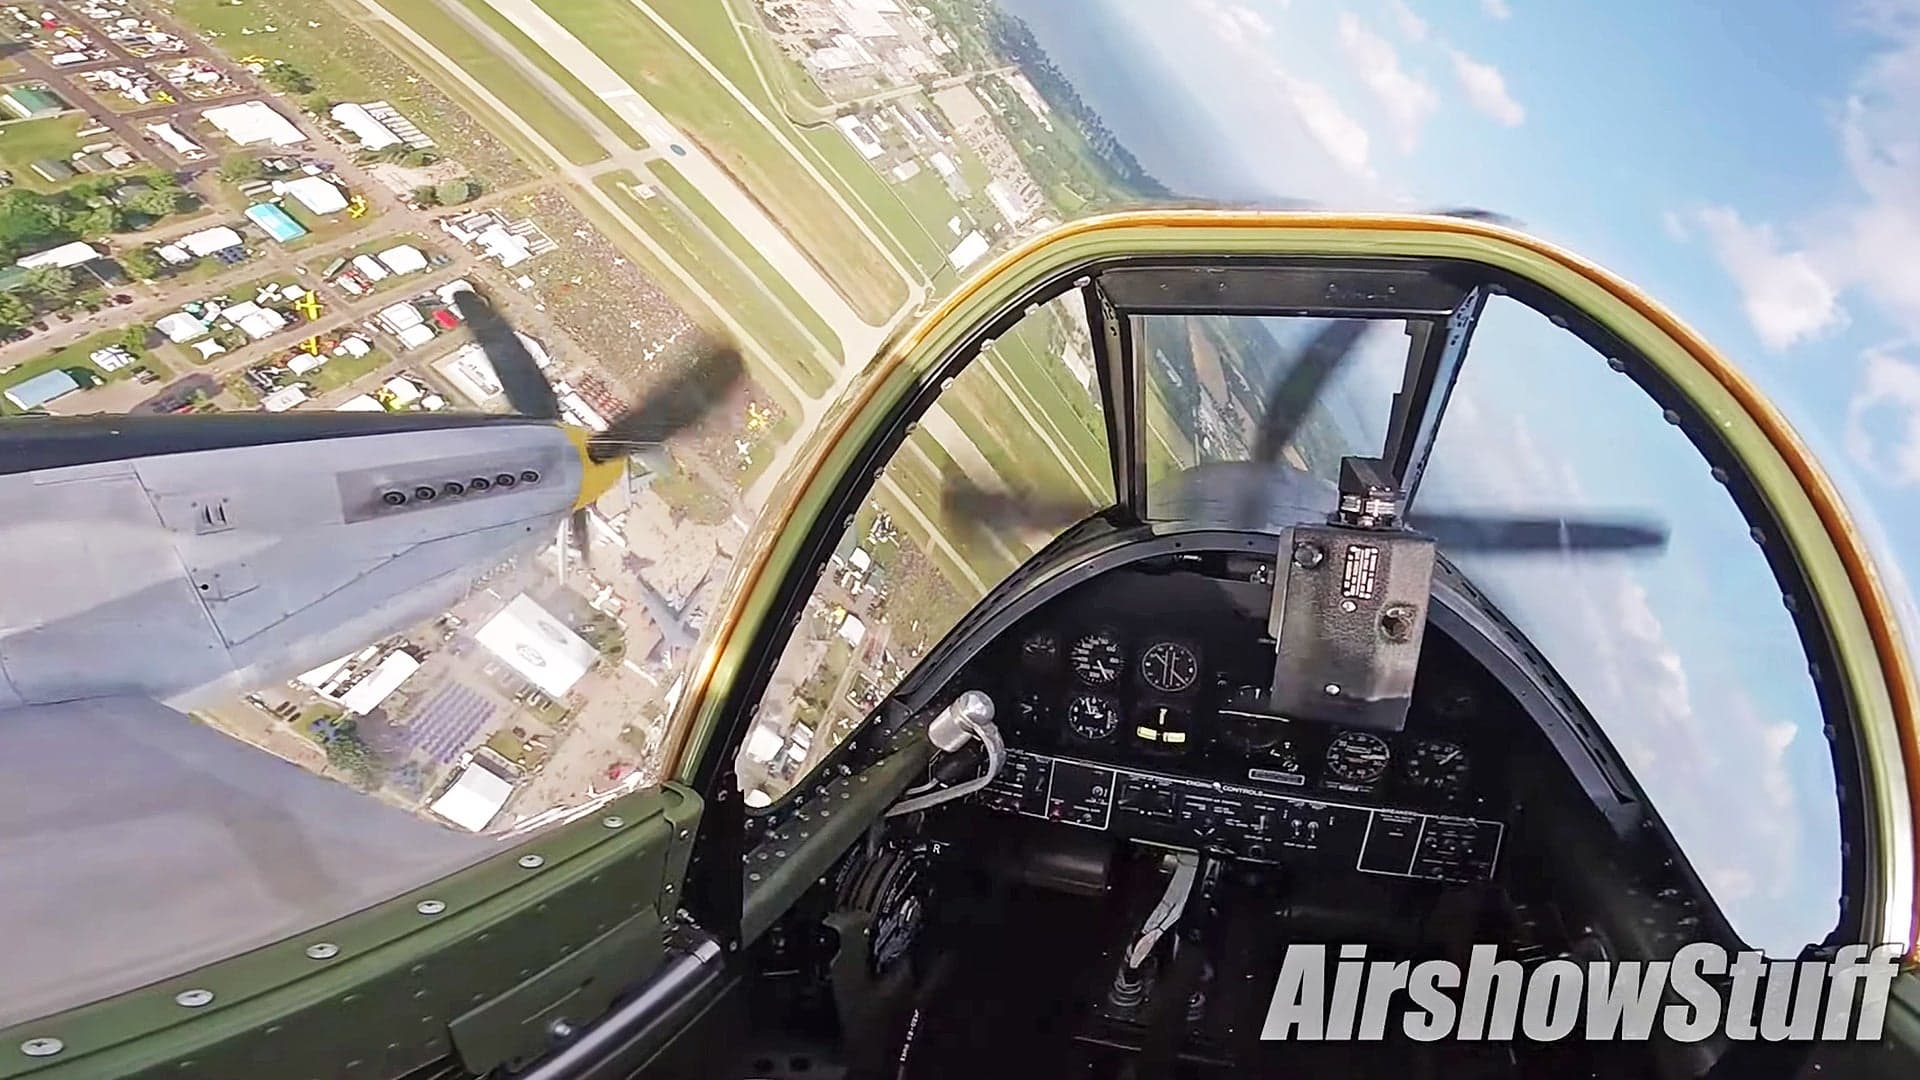 Soar Over Oshkosh In The World’s Only Flying Twin Mustang In This Cockpit Video